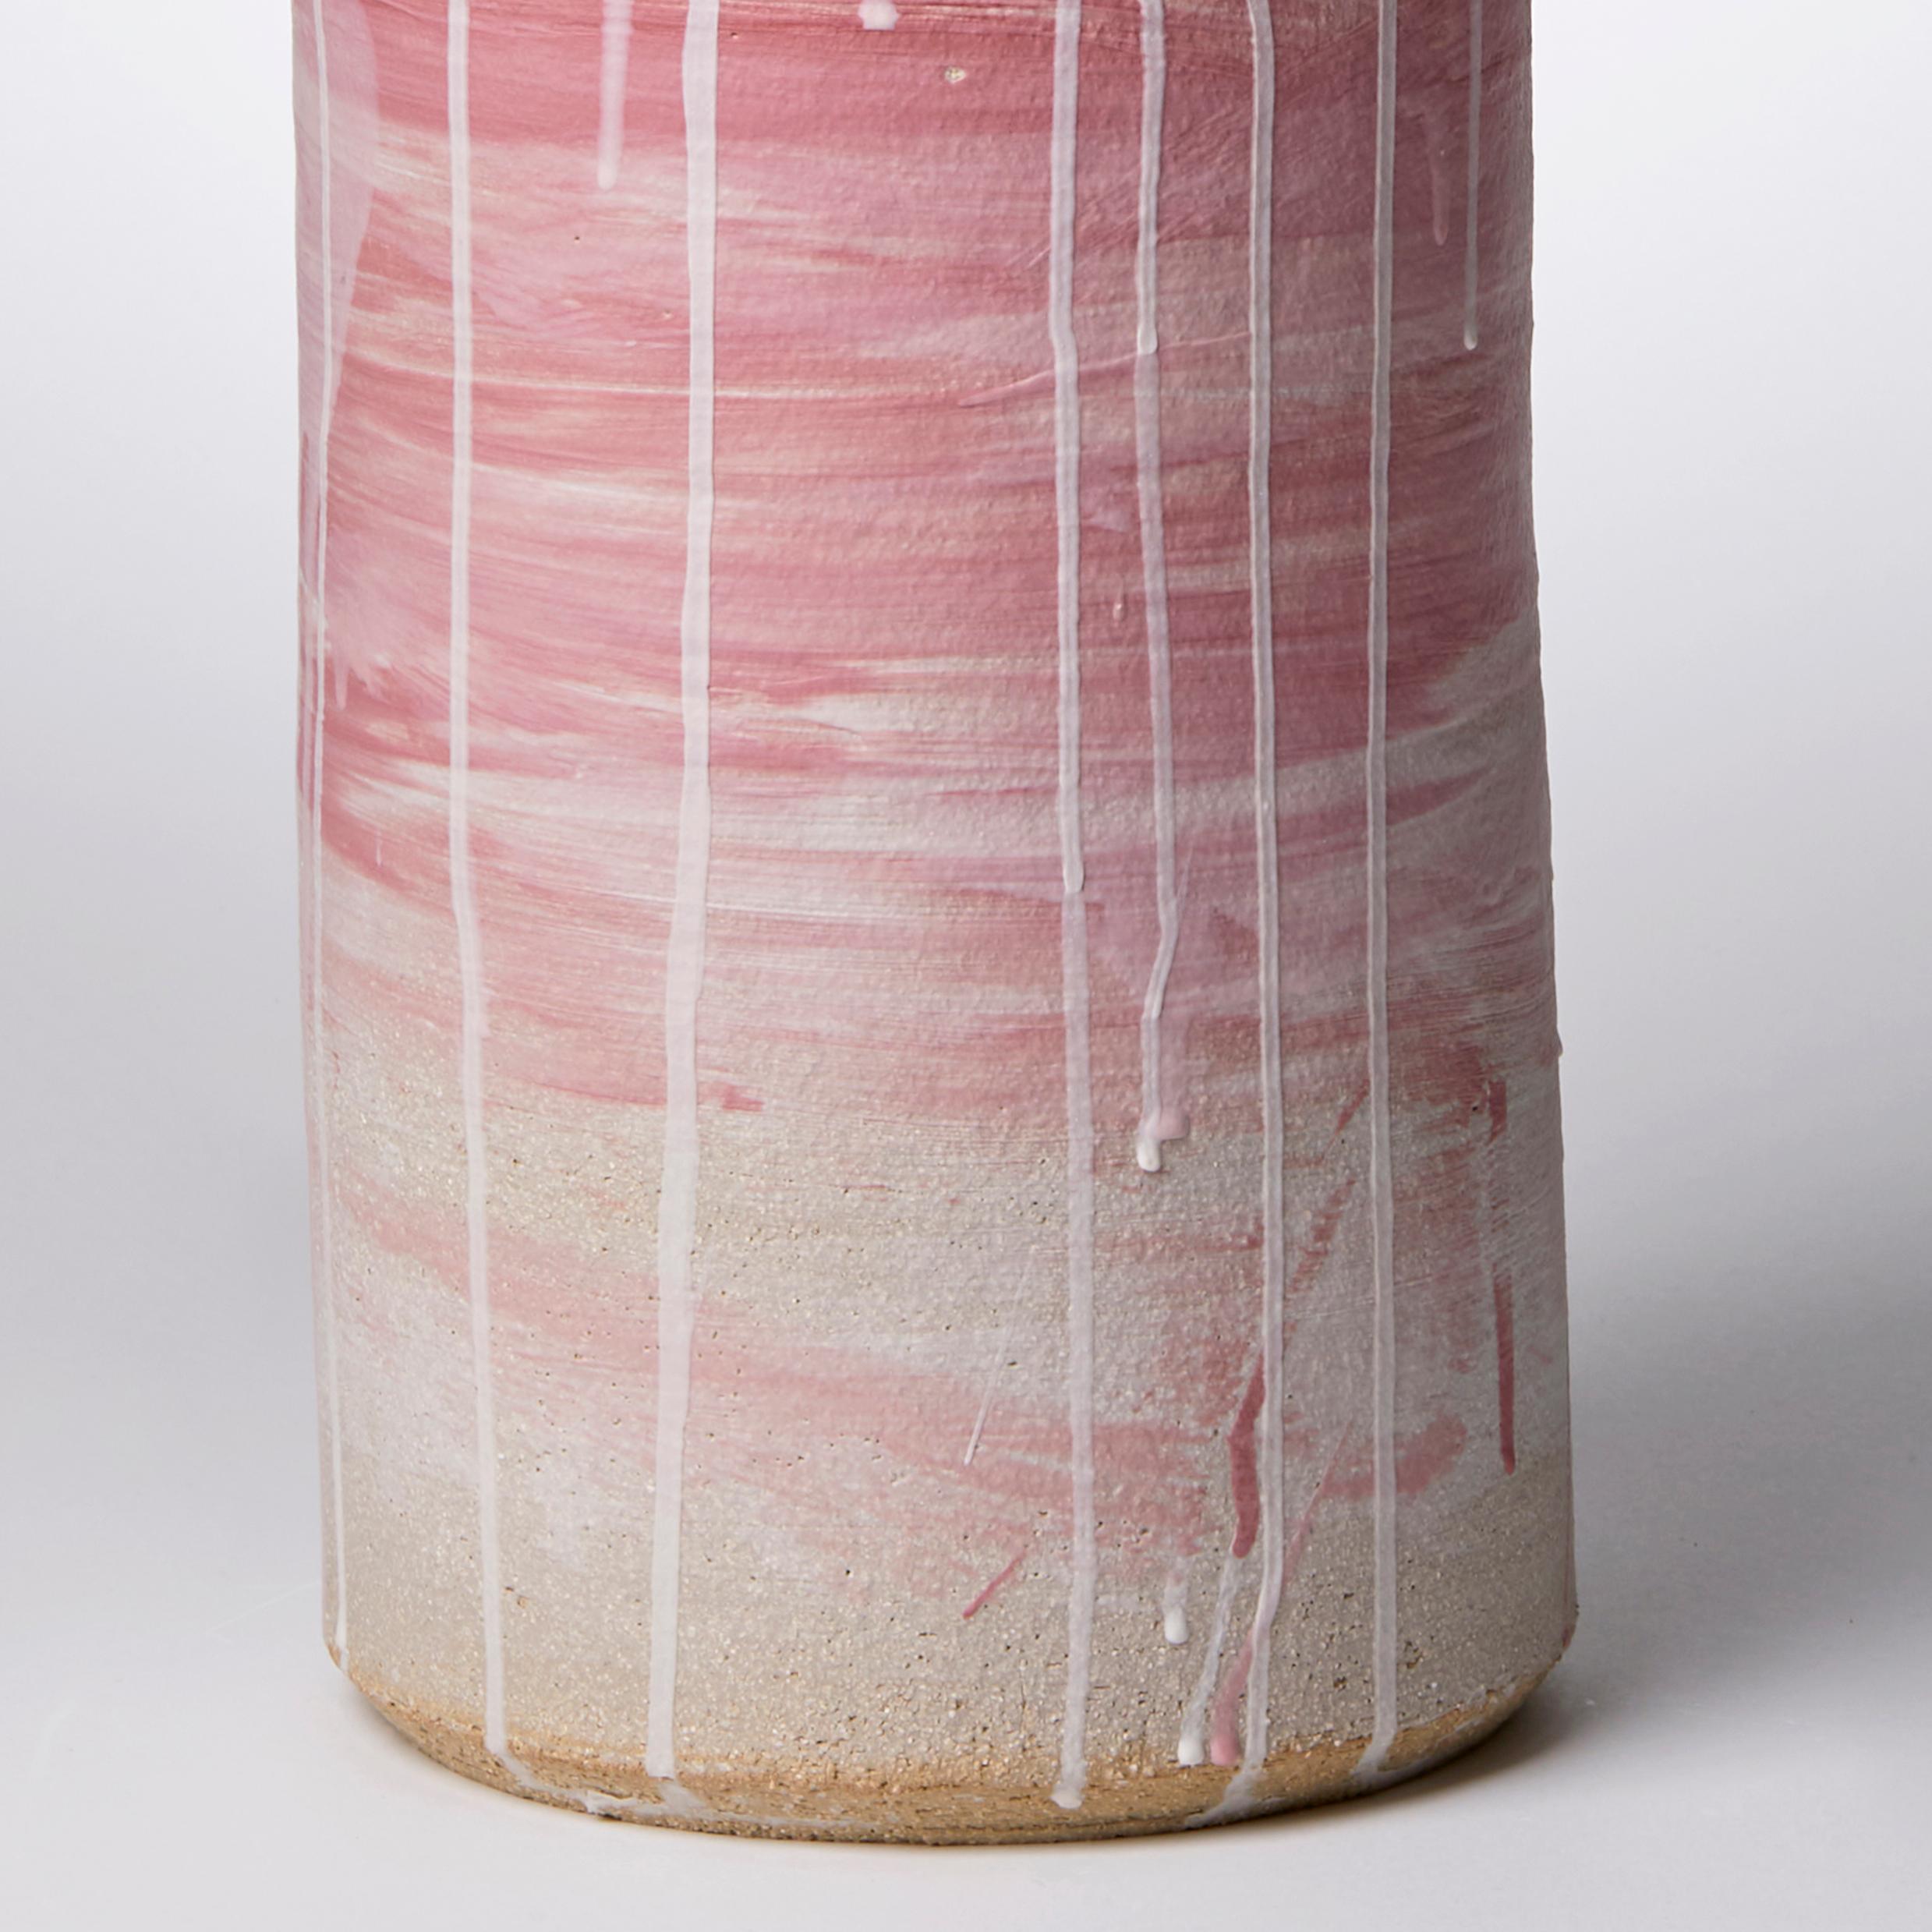 Hand-Crafted Colonnade I, a Unique Ceramic Sculptural Vase in Pink & White by Jo Taylor For Sale